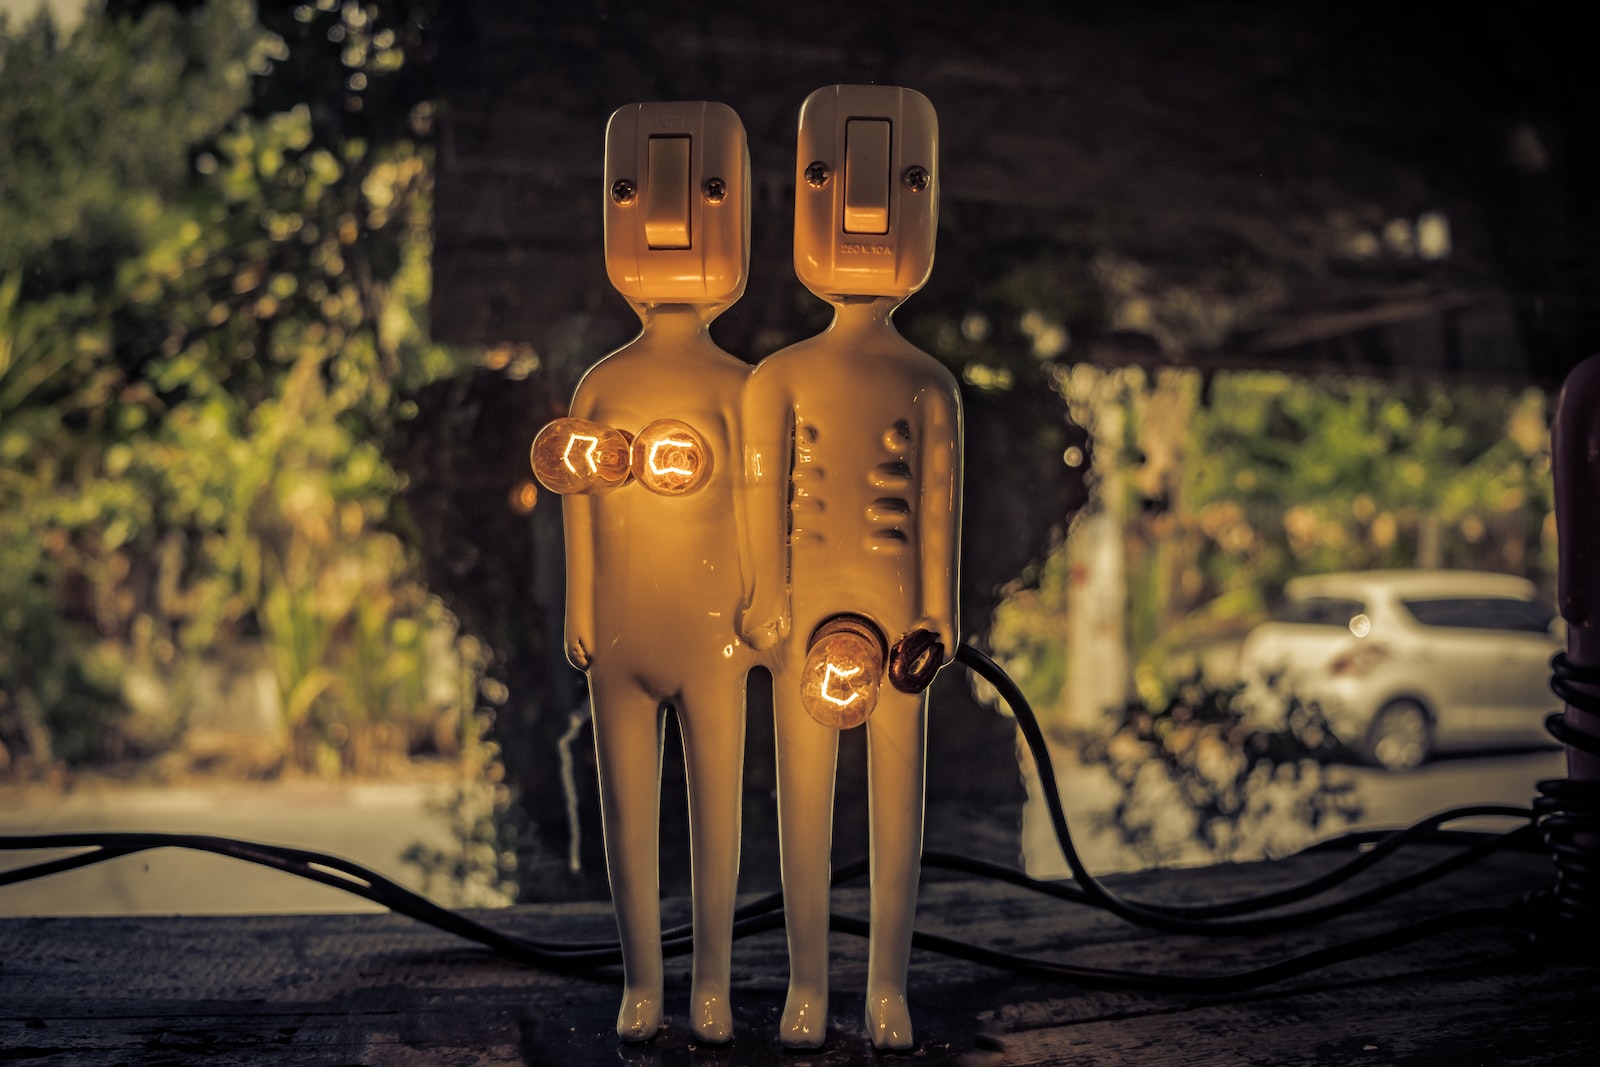 lighted switch character decor